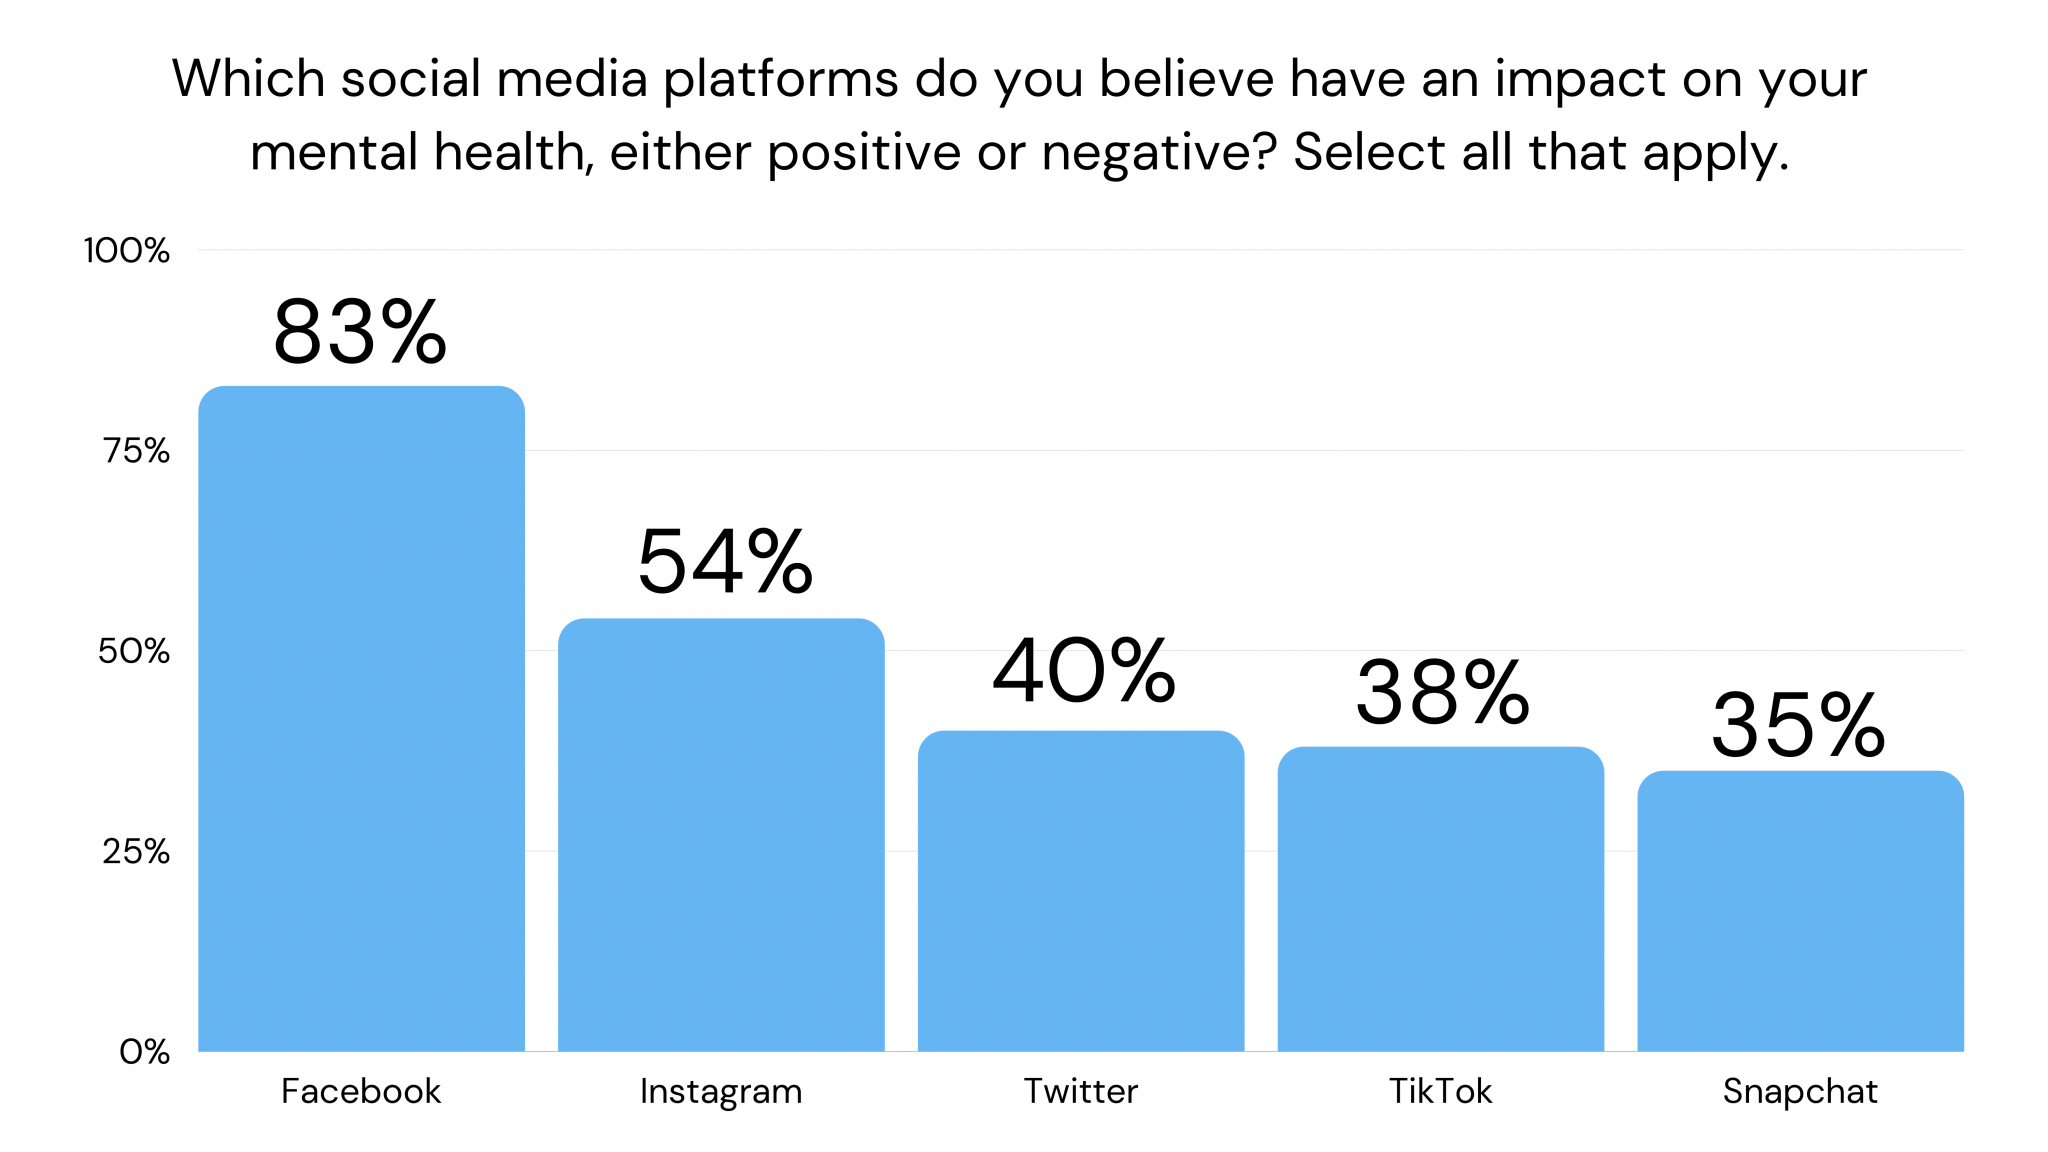 A bar chart shows the percentage of people who believe that each social media platform has an impact on their mental health.